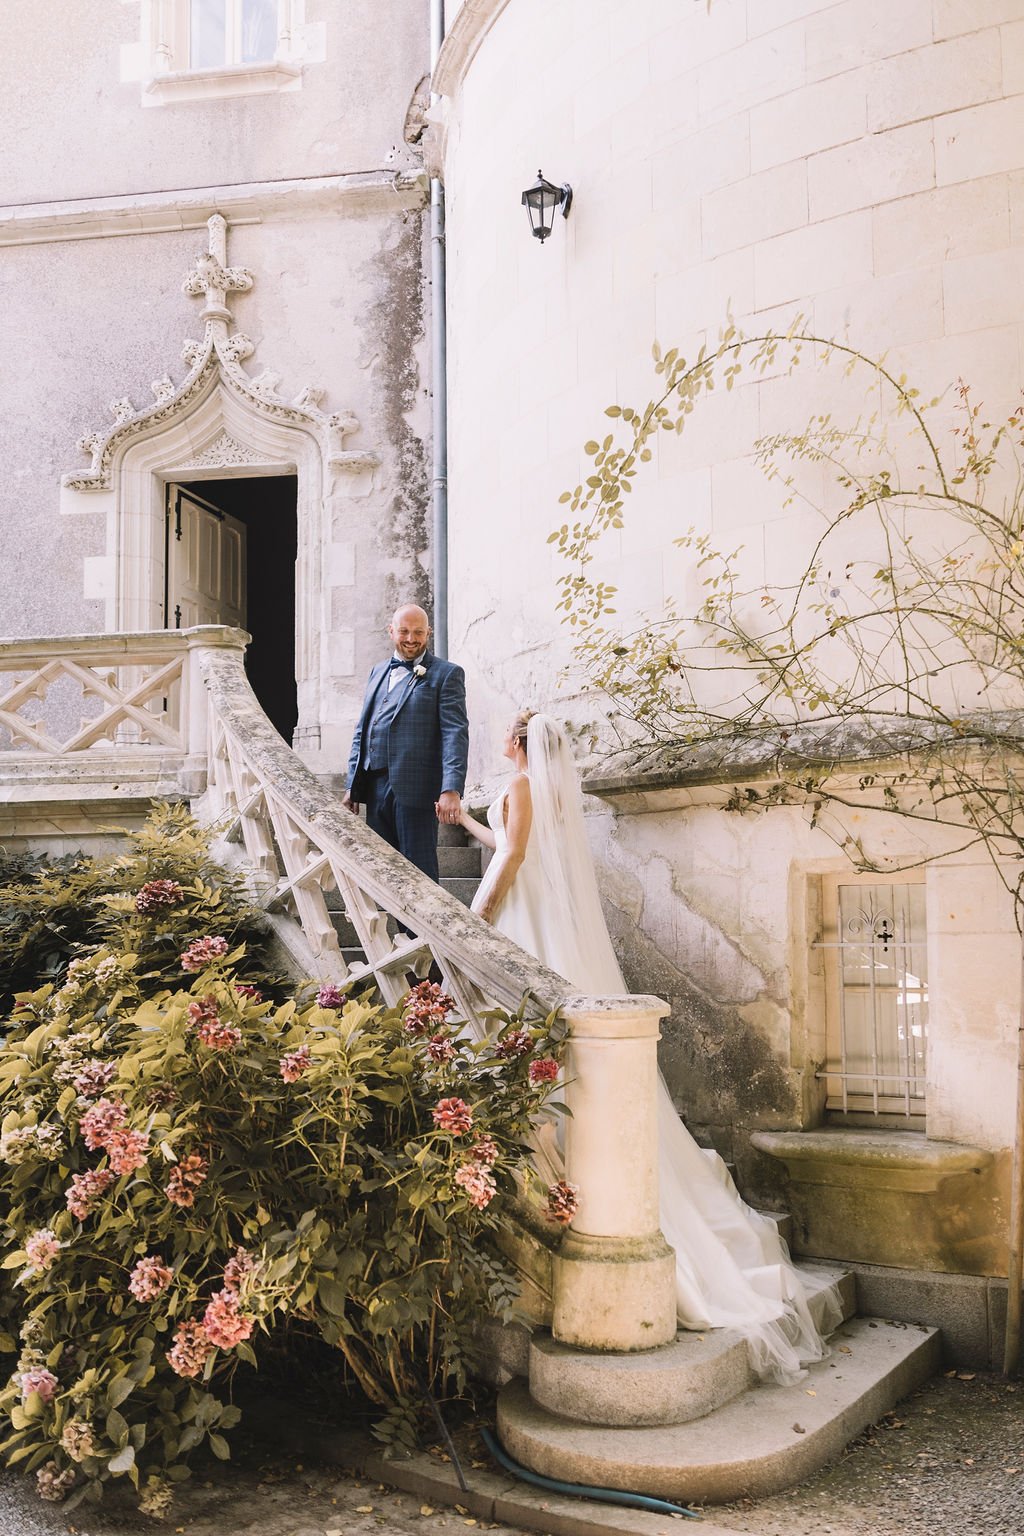  The wedding photographer has captured the moment the bride and groom walk up a beautiful stone staircase outside. The groom is ahead and is looking back towards the bride as they hold hands.  